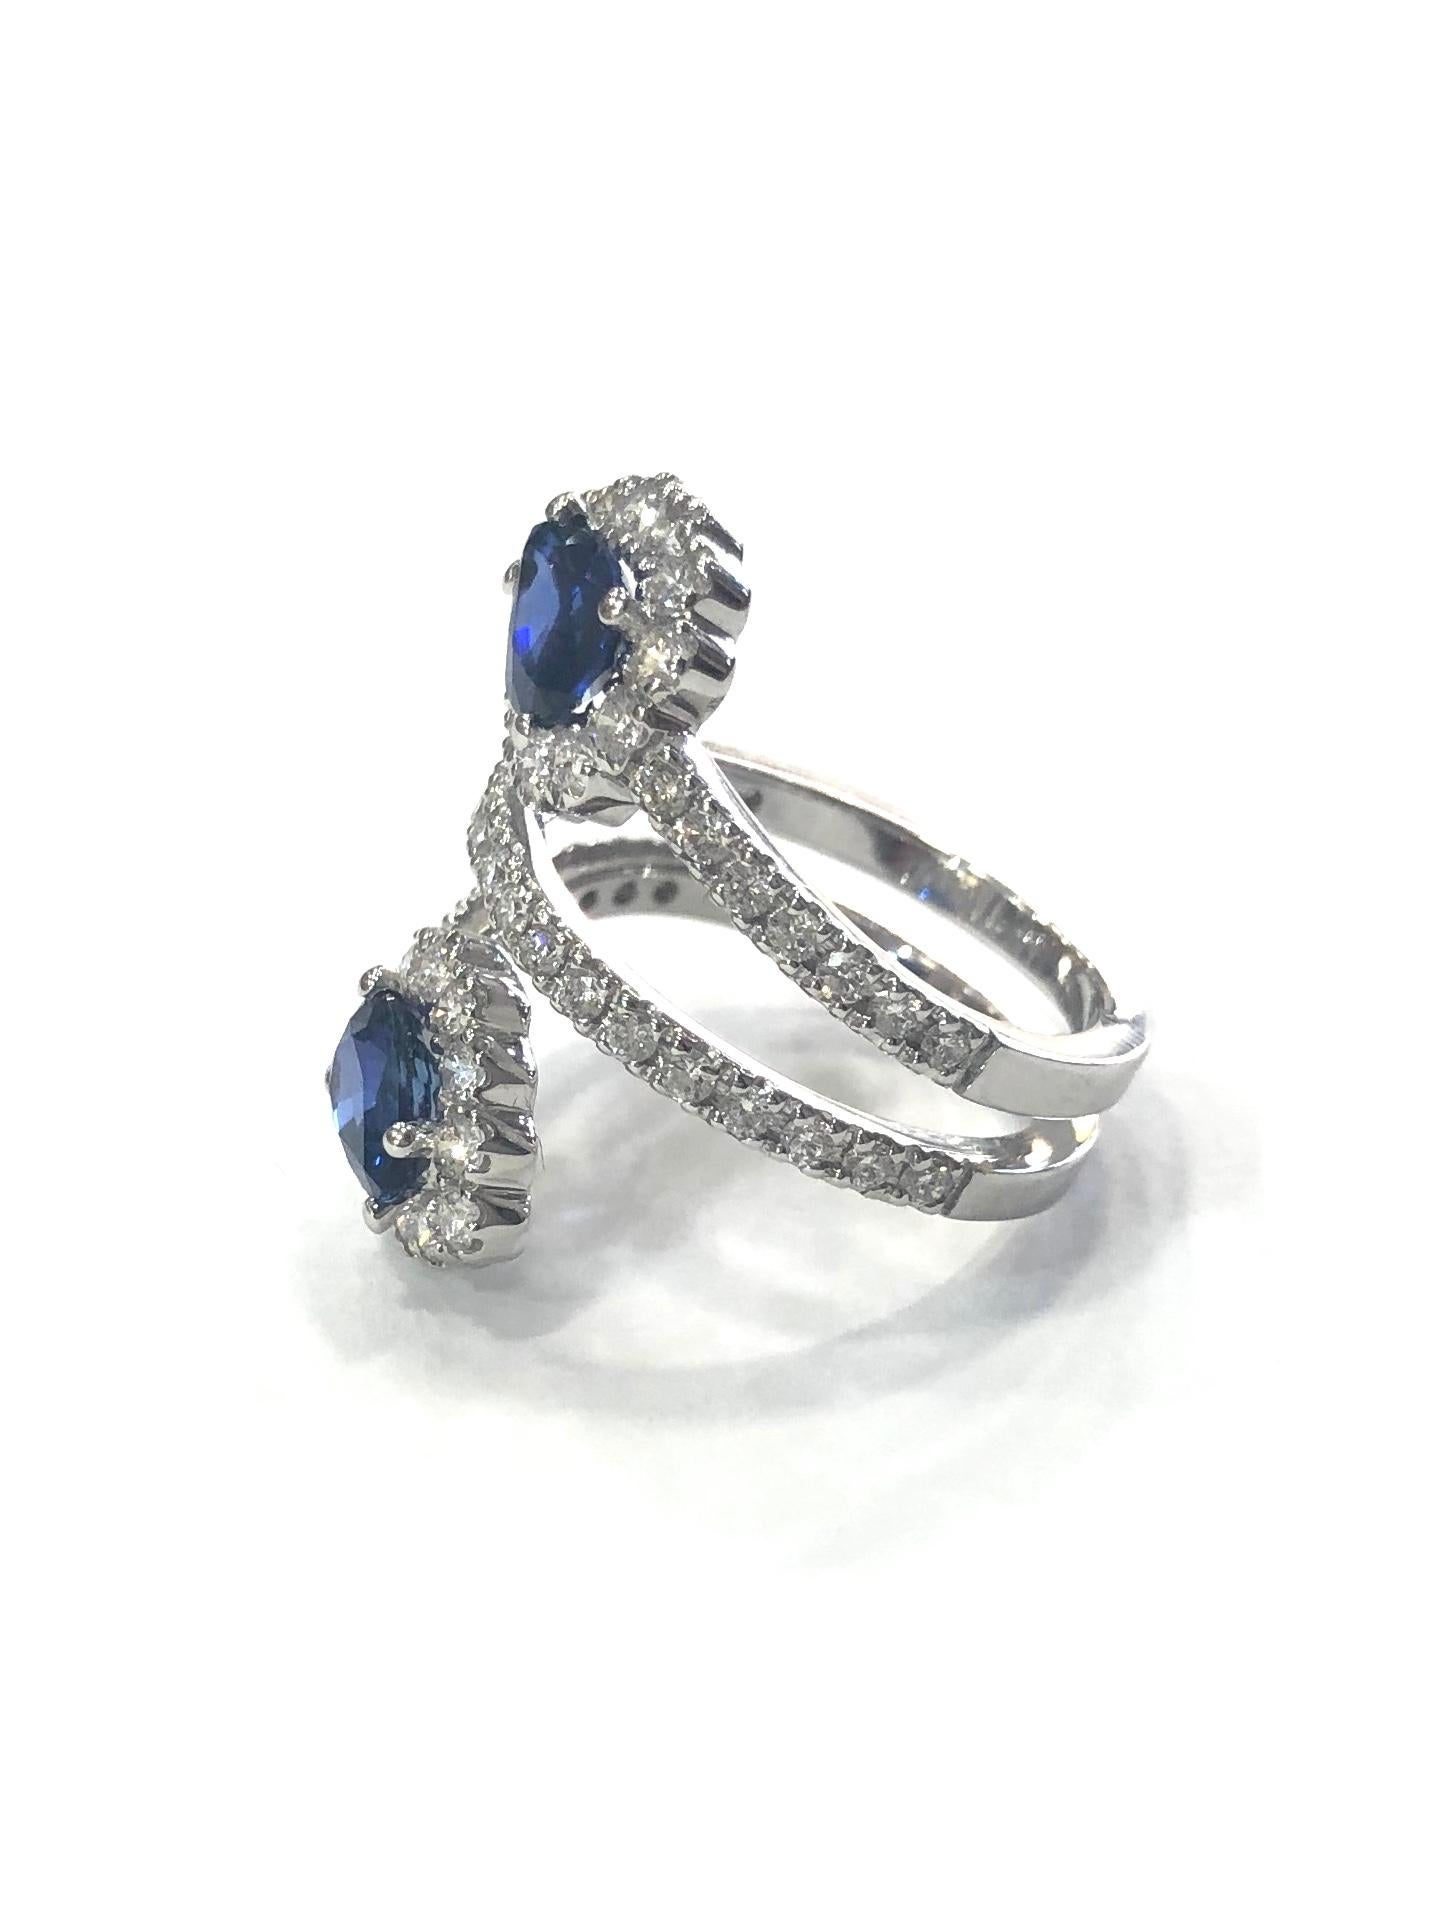 18ct White Gold Diamond and Sapphire Crossover Cocktail Ring. Set with two central pear shape natural sapphires surrounded by round brilliant cut diamonds. With Diamond set shoulders and a central band of diamonds. 
With a full english